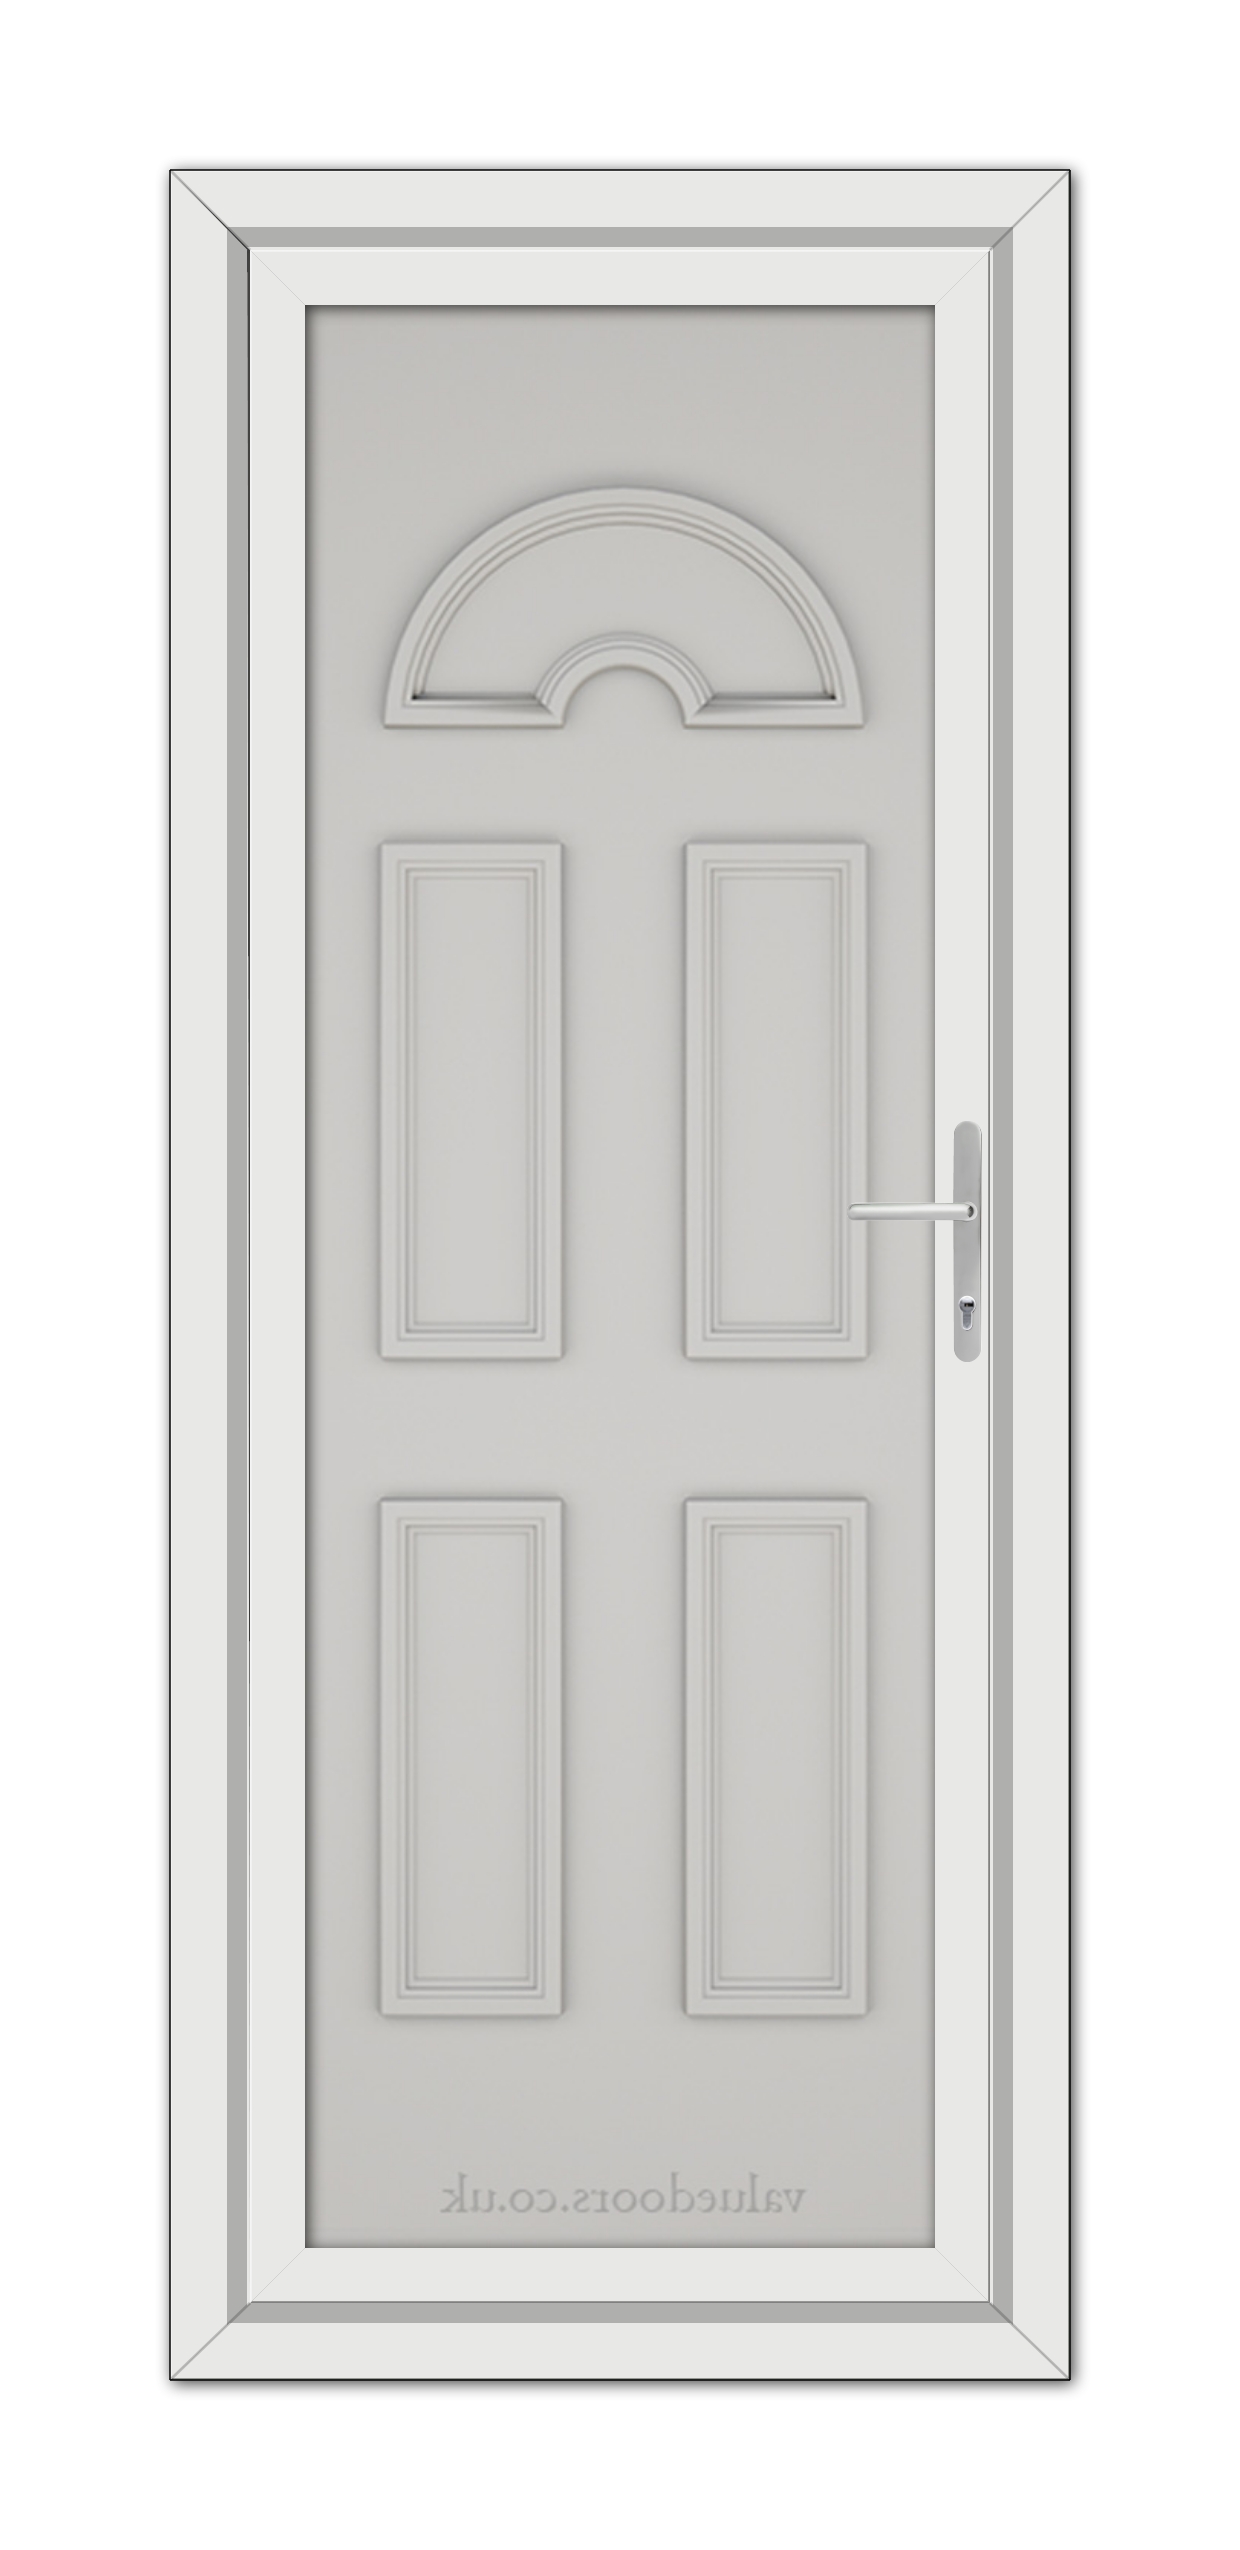 A Silver Grey Sandringham Solid uPVC door with four panels and a semi-circular decorative window at the top, featuring a metallic handle on the right side.